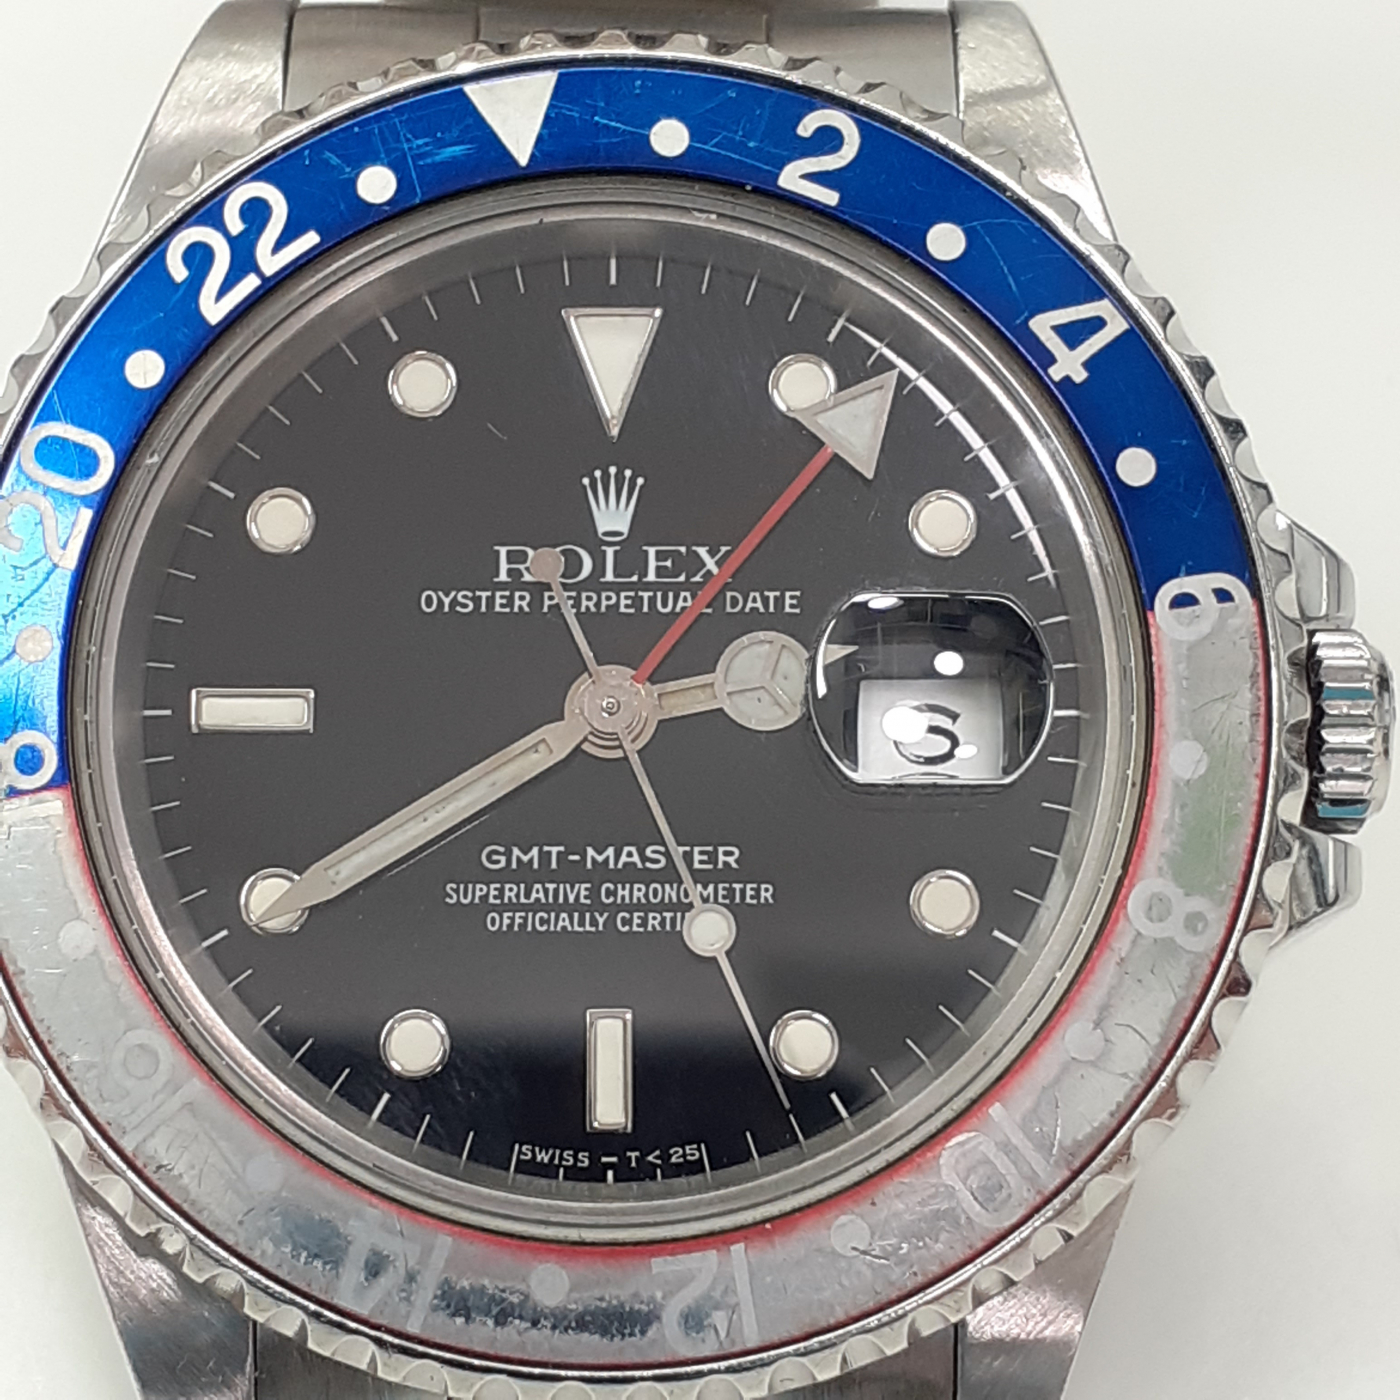 Rolex GMT Master Sapphire Crystal RARE BLUE AND FADED INSERT 16700